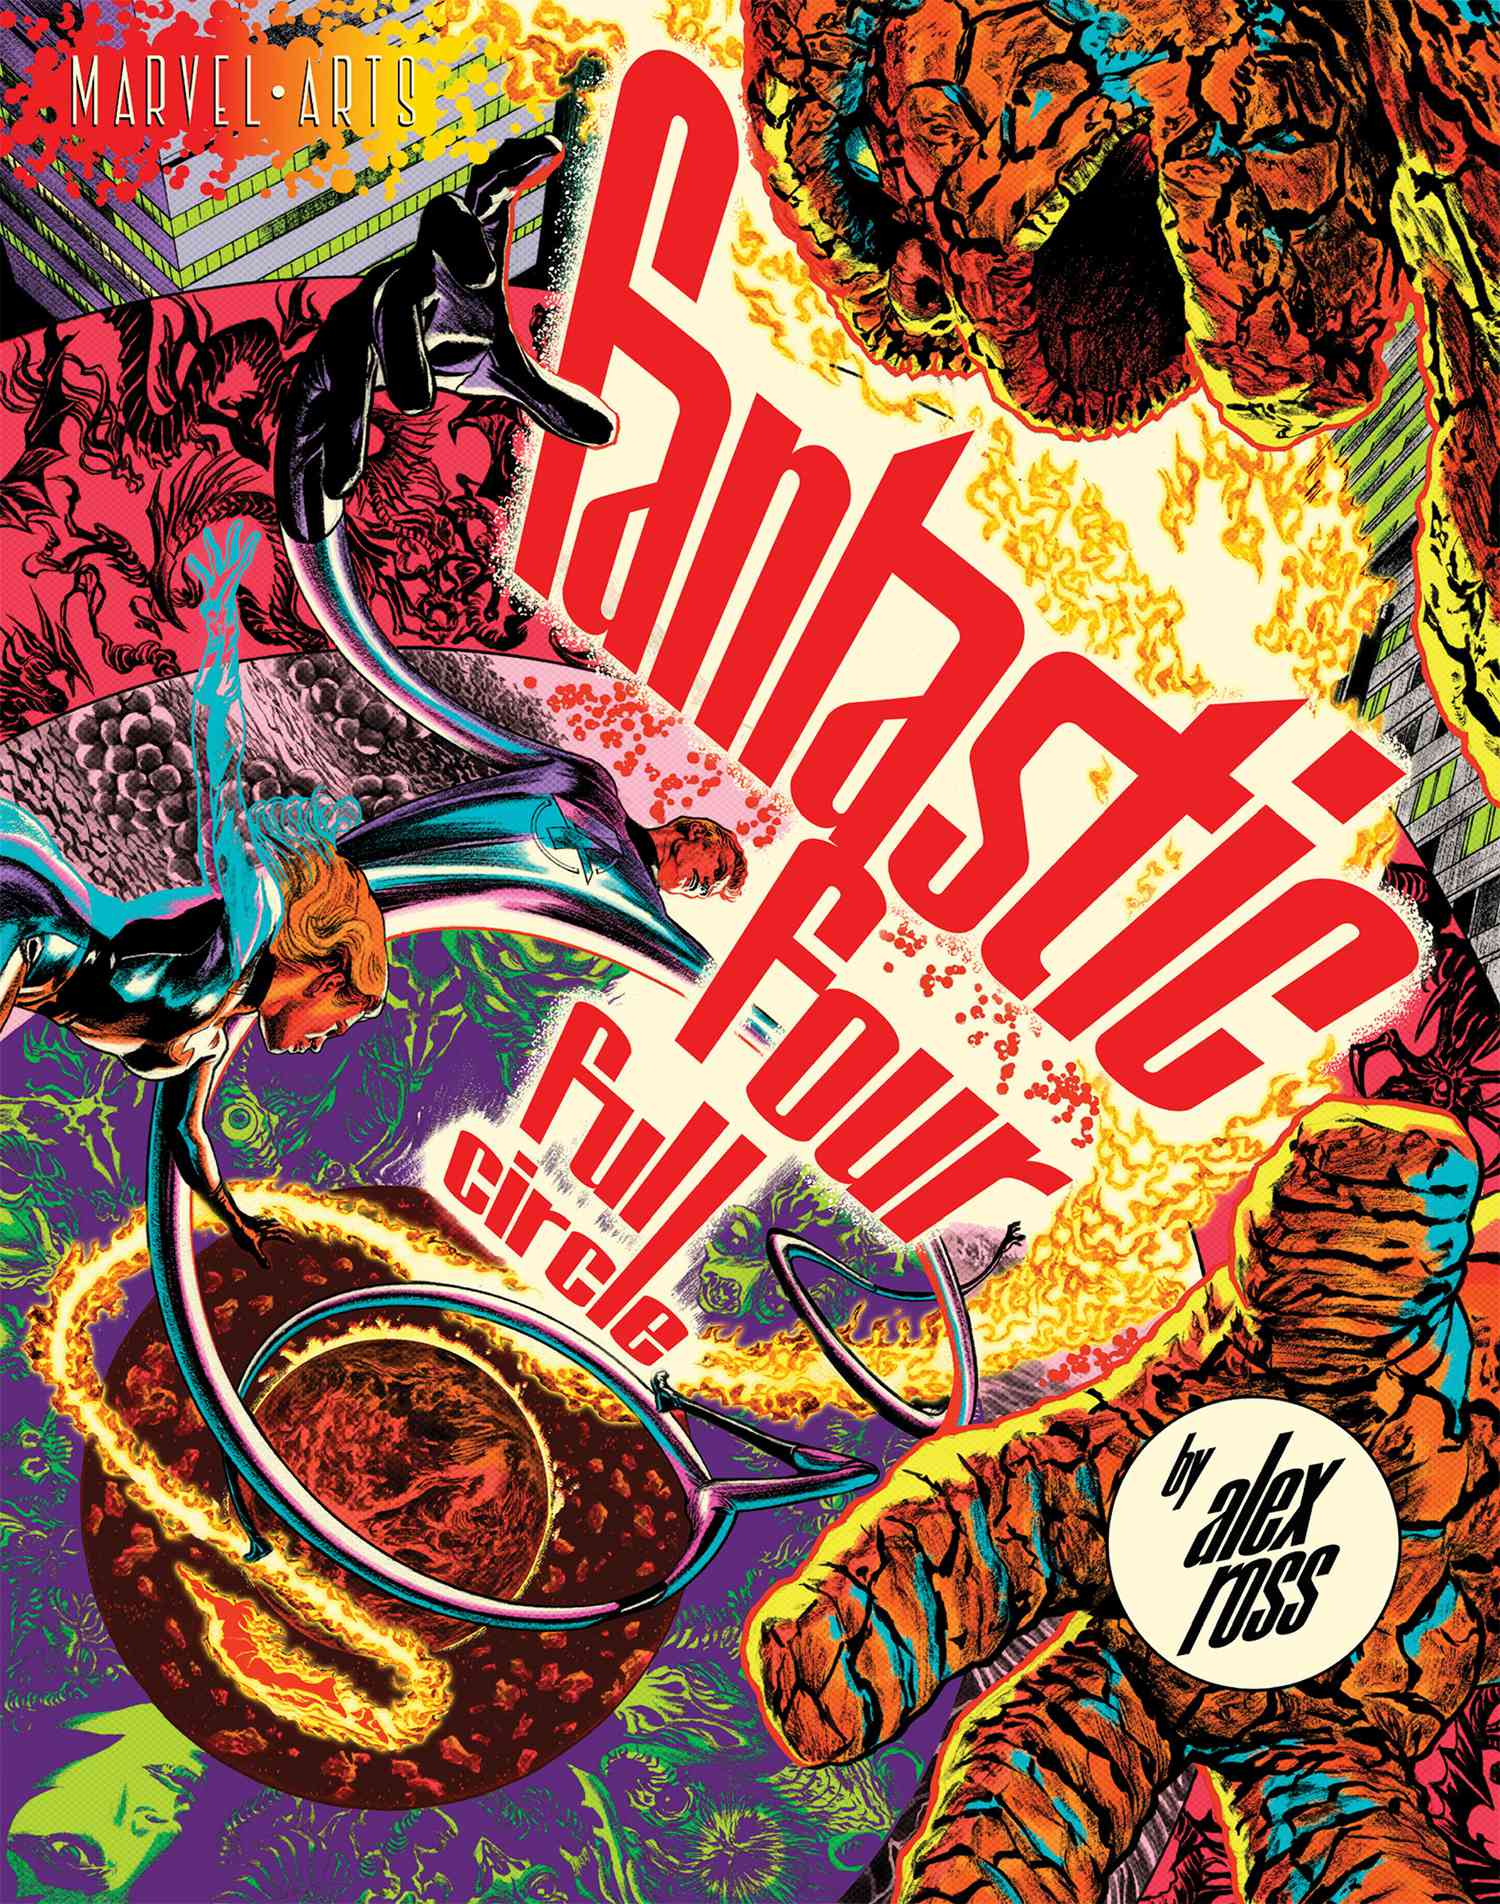 The cover of 'Fantastic Four: Full Circle'